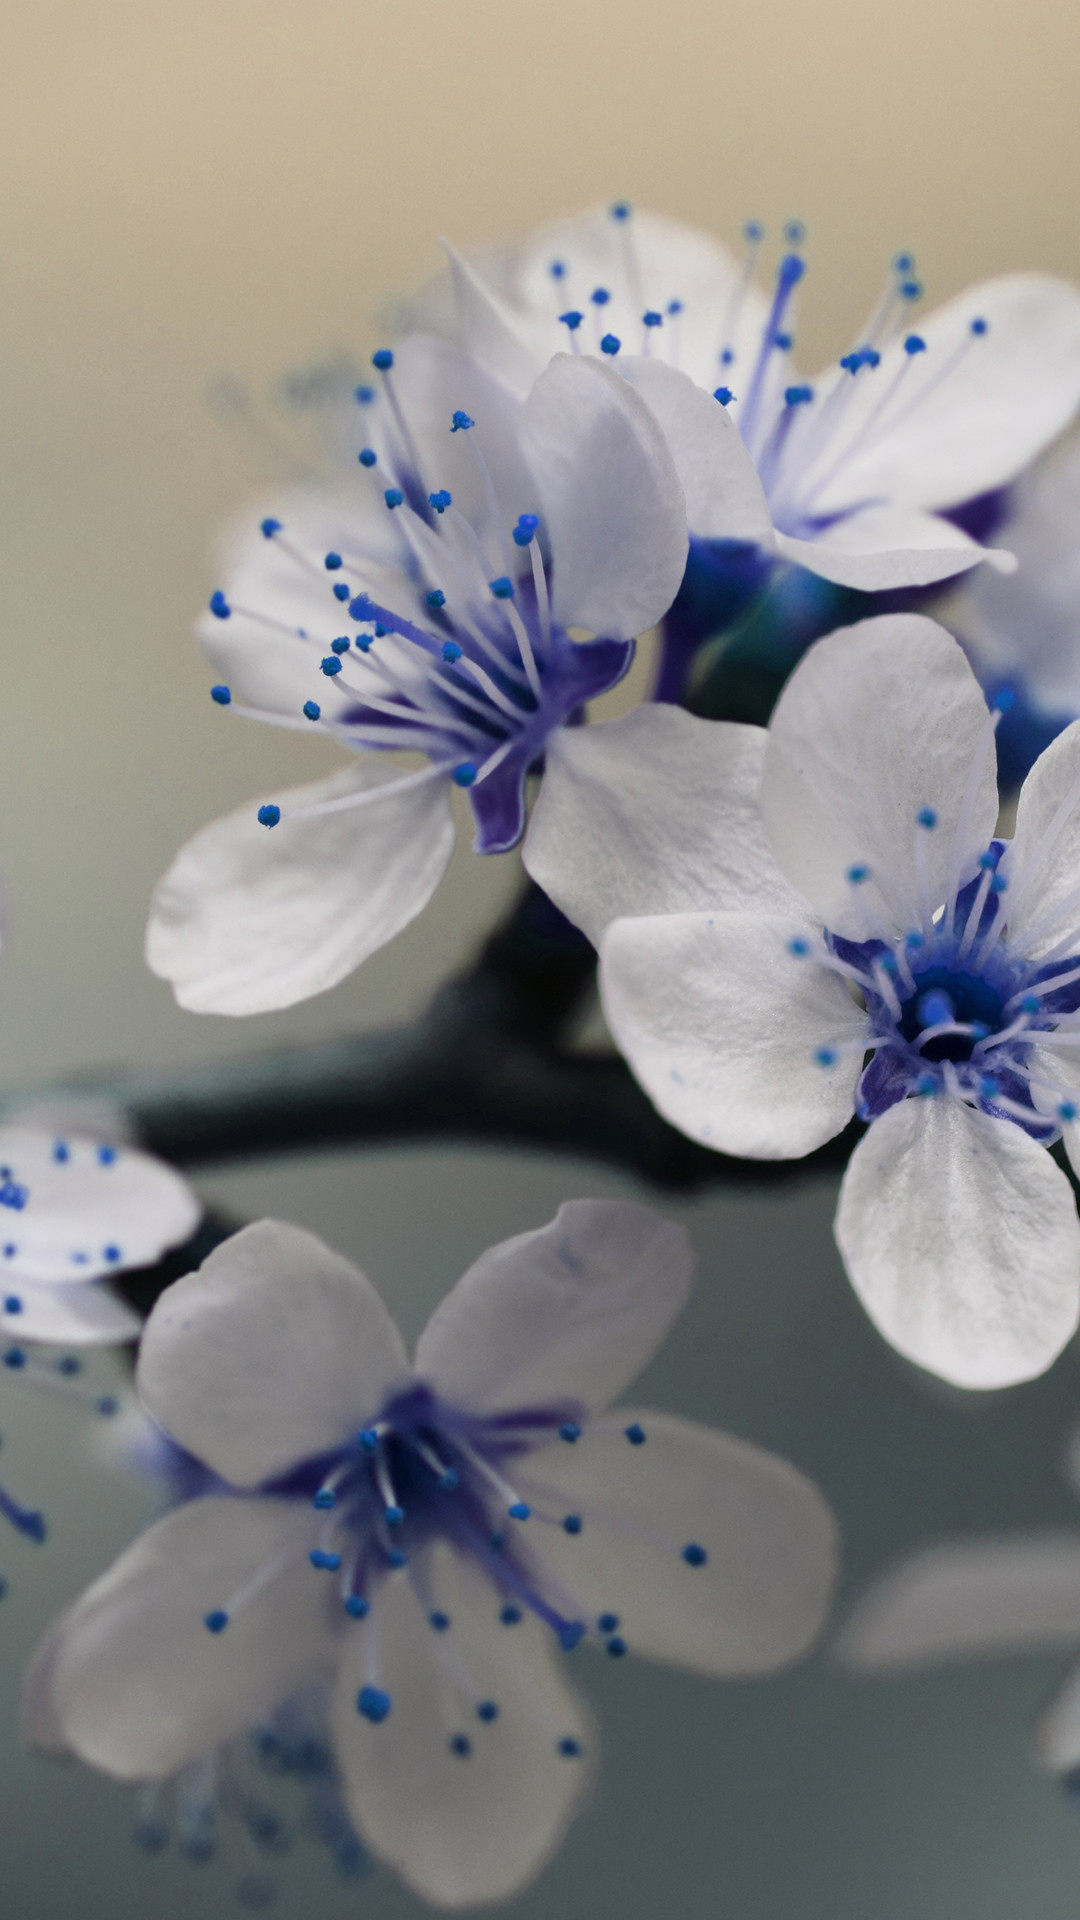 Blue Flower Wallpapers Hd Resolution - Good Morning Images Full Hd , HD Wallpaper & Backgrounds